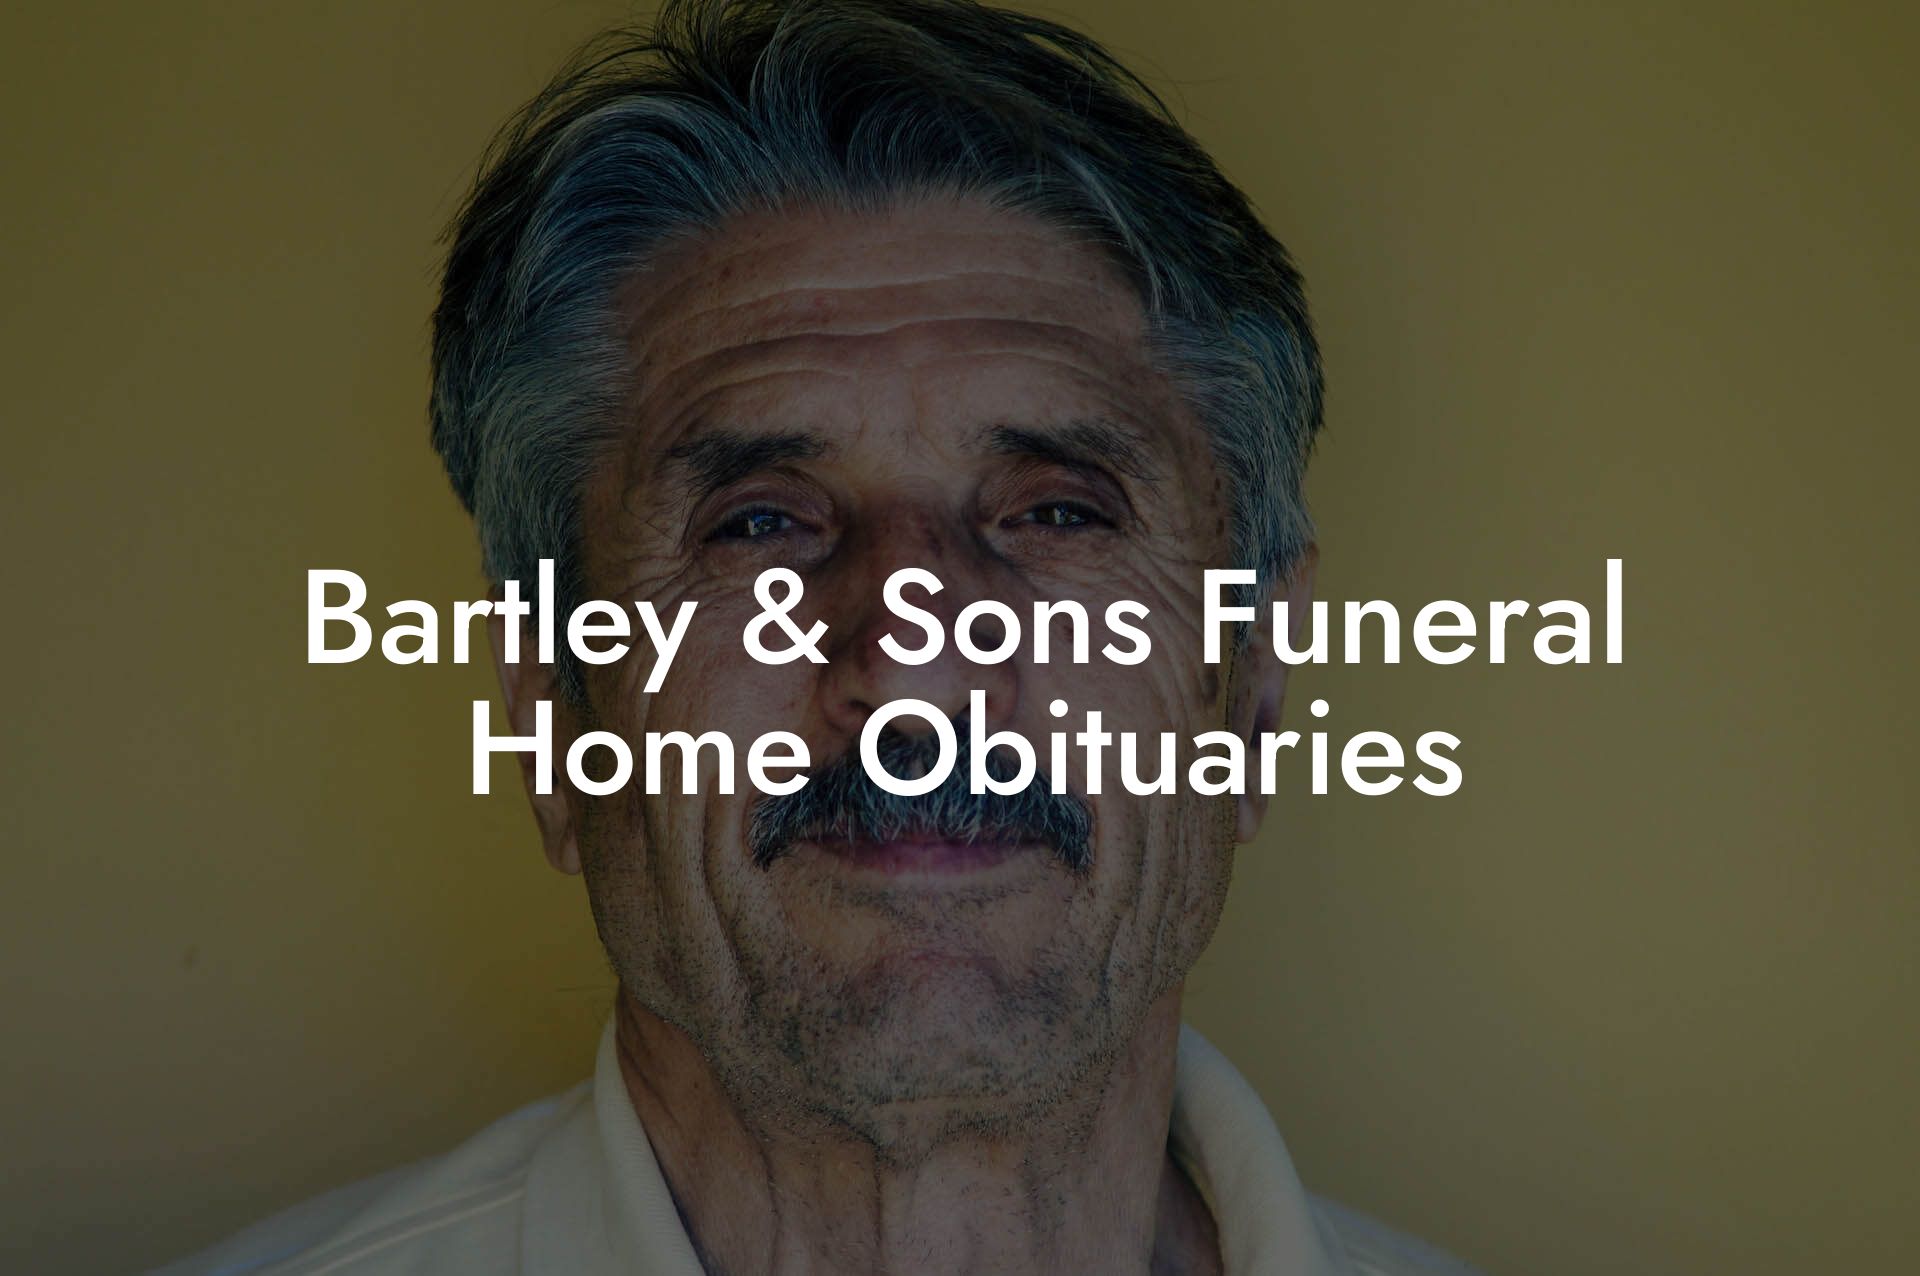 Bartley & Sons Funeral Home Obituaries